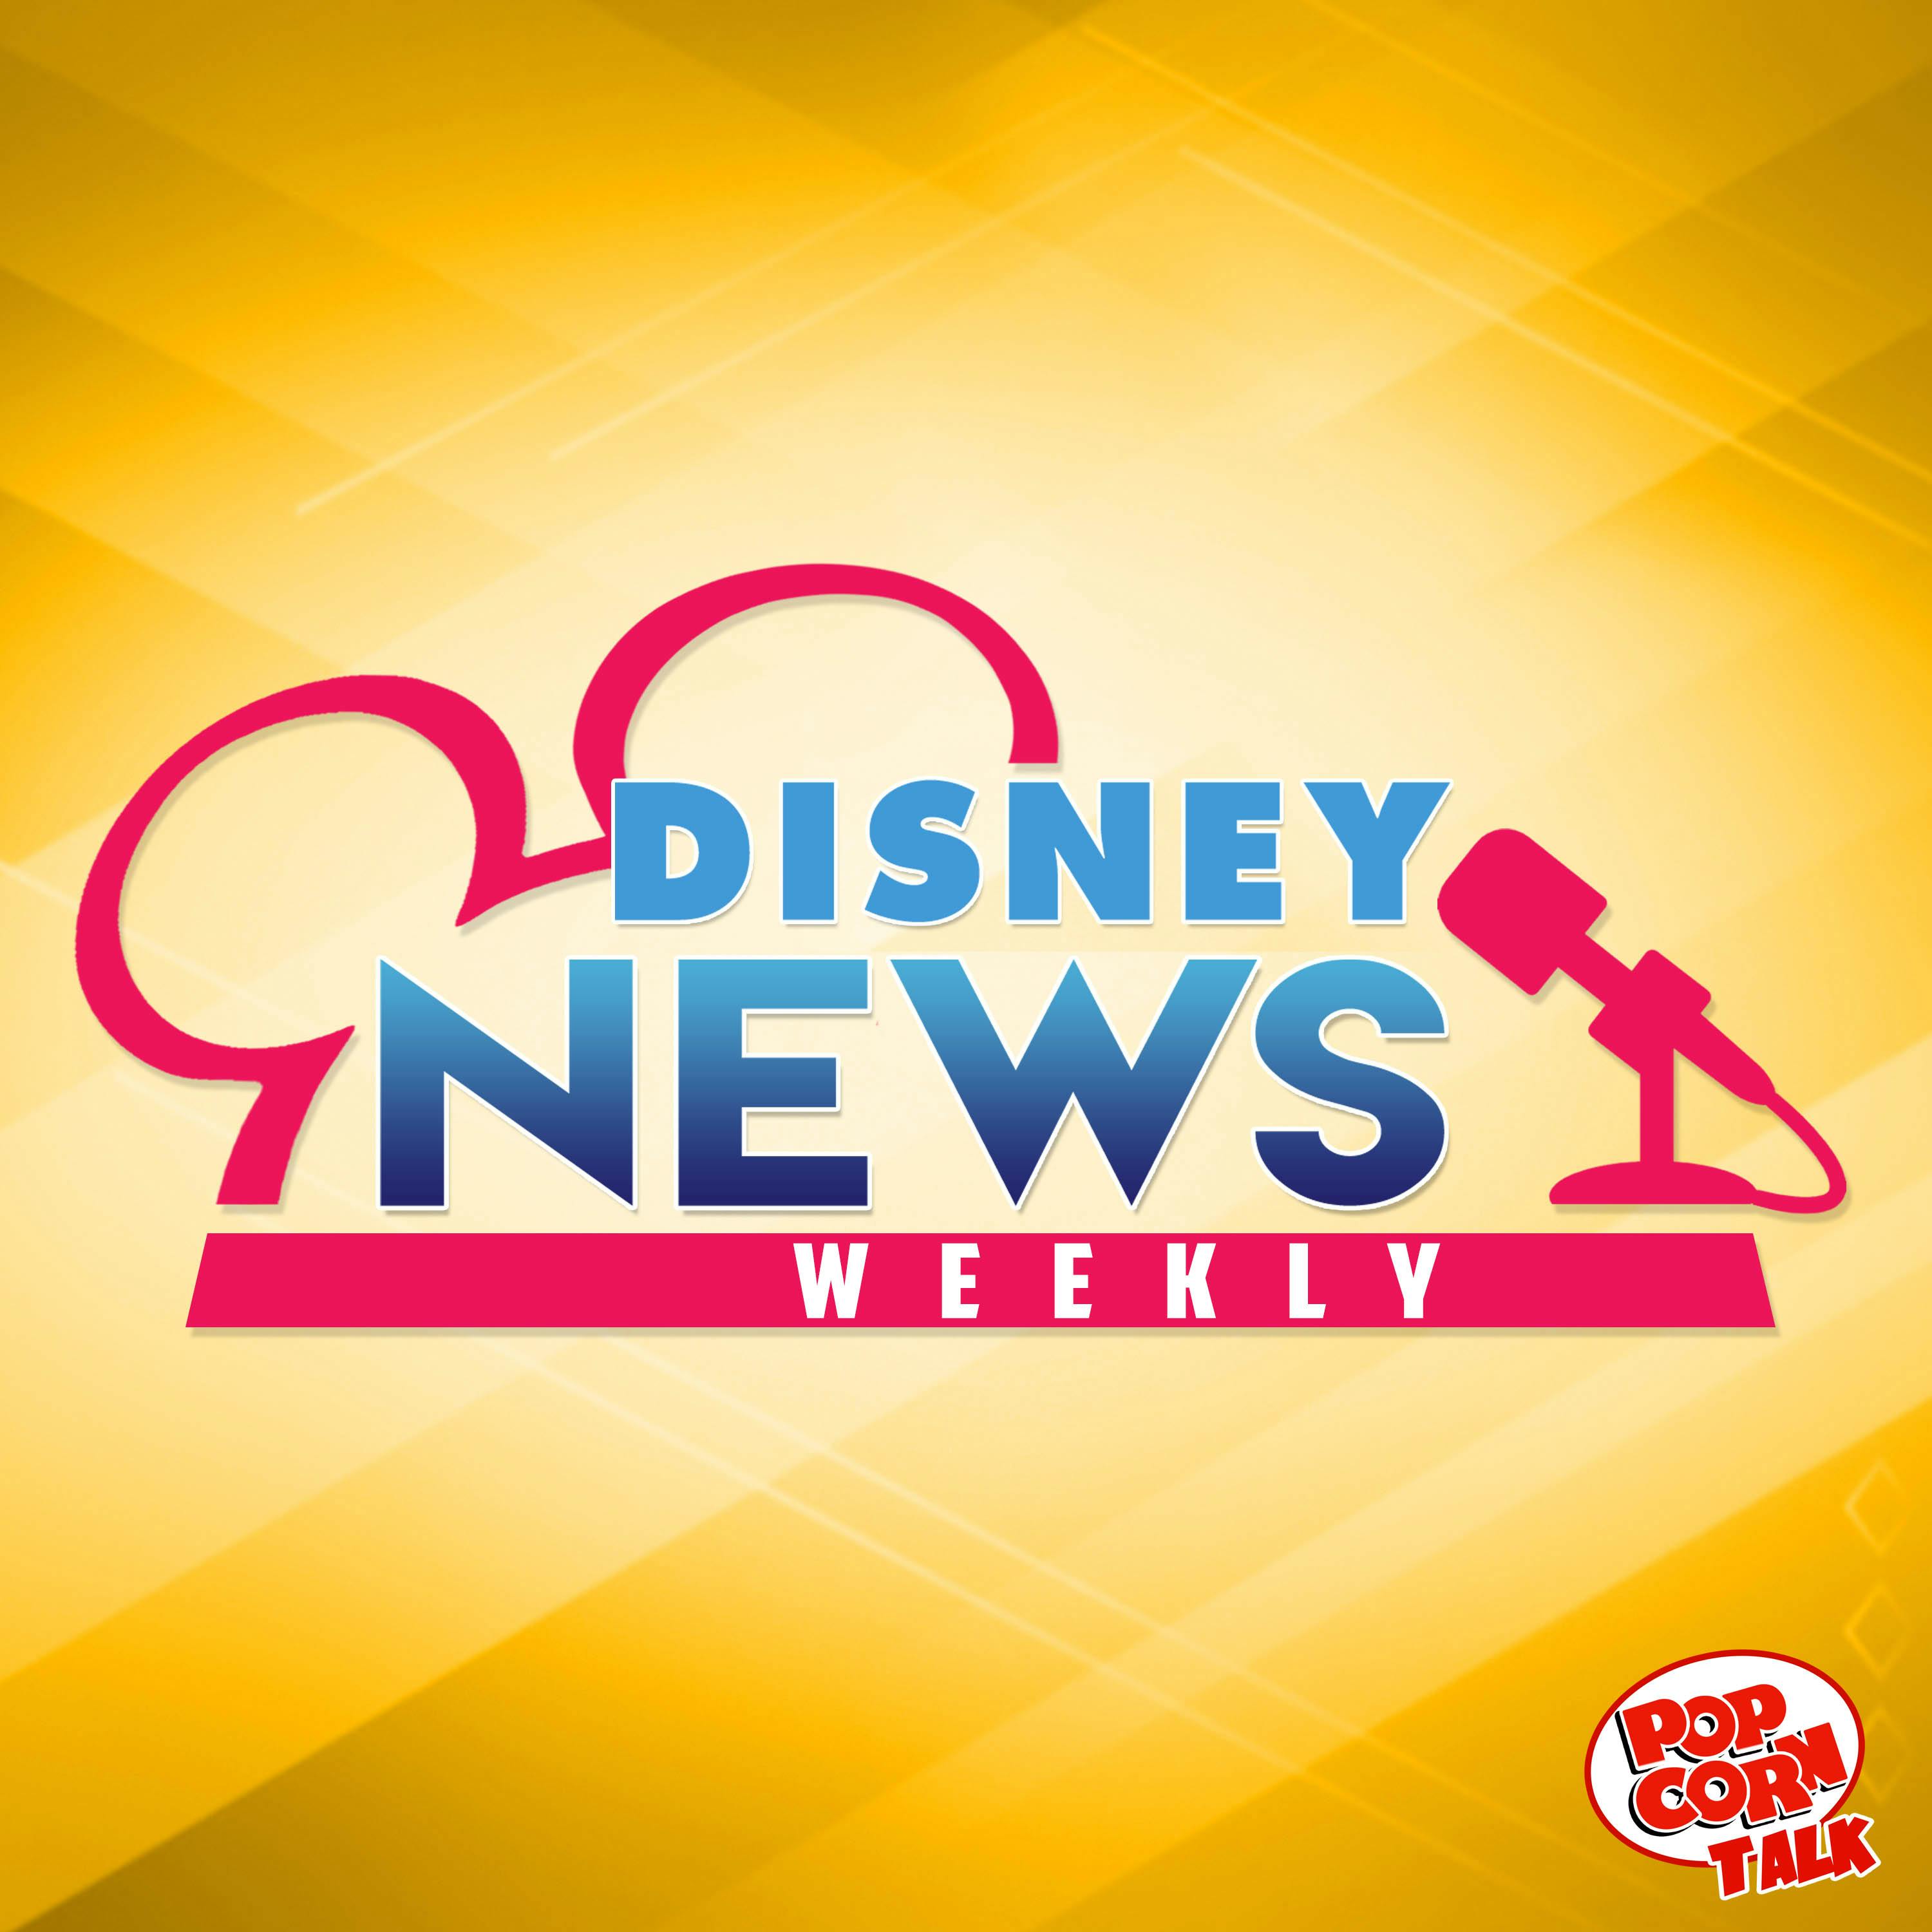 Disney Developing Pirates 6 & the BIGGEST Disney Collectible Auction Ever? – Disney News Weekly 118